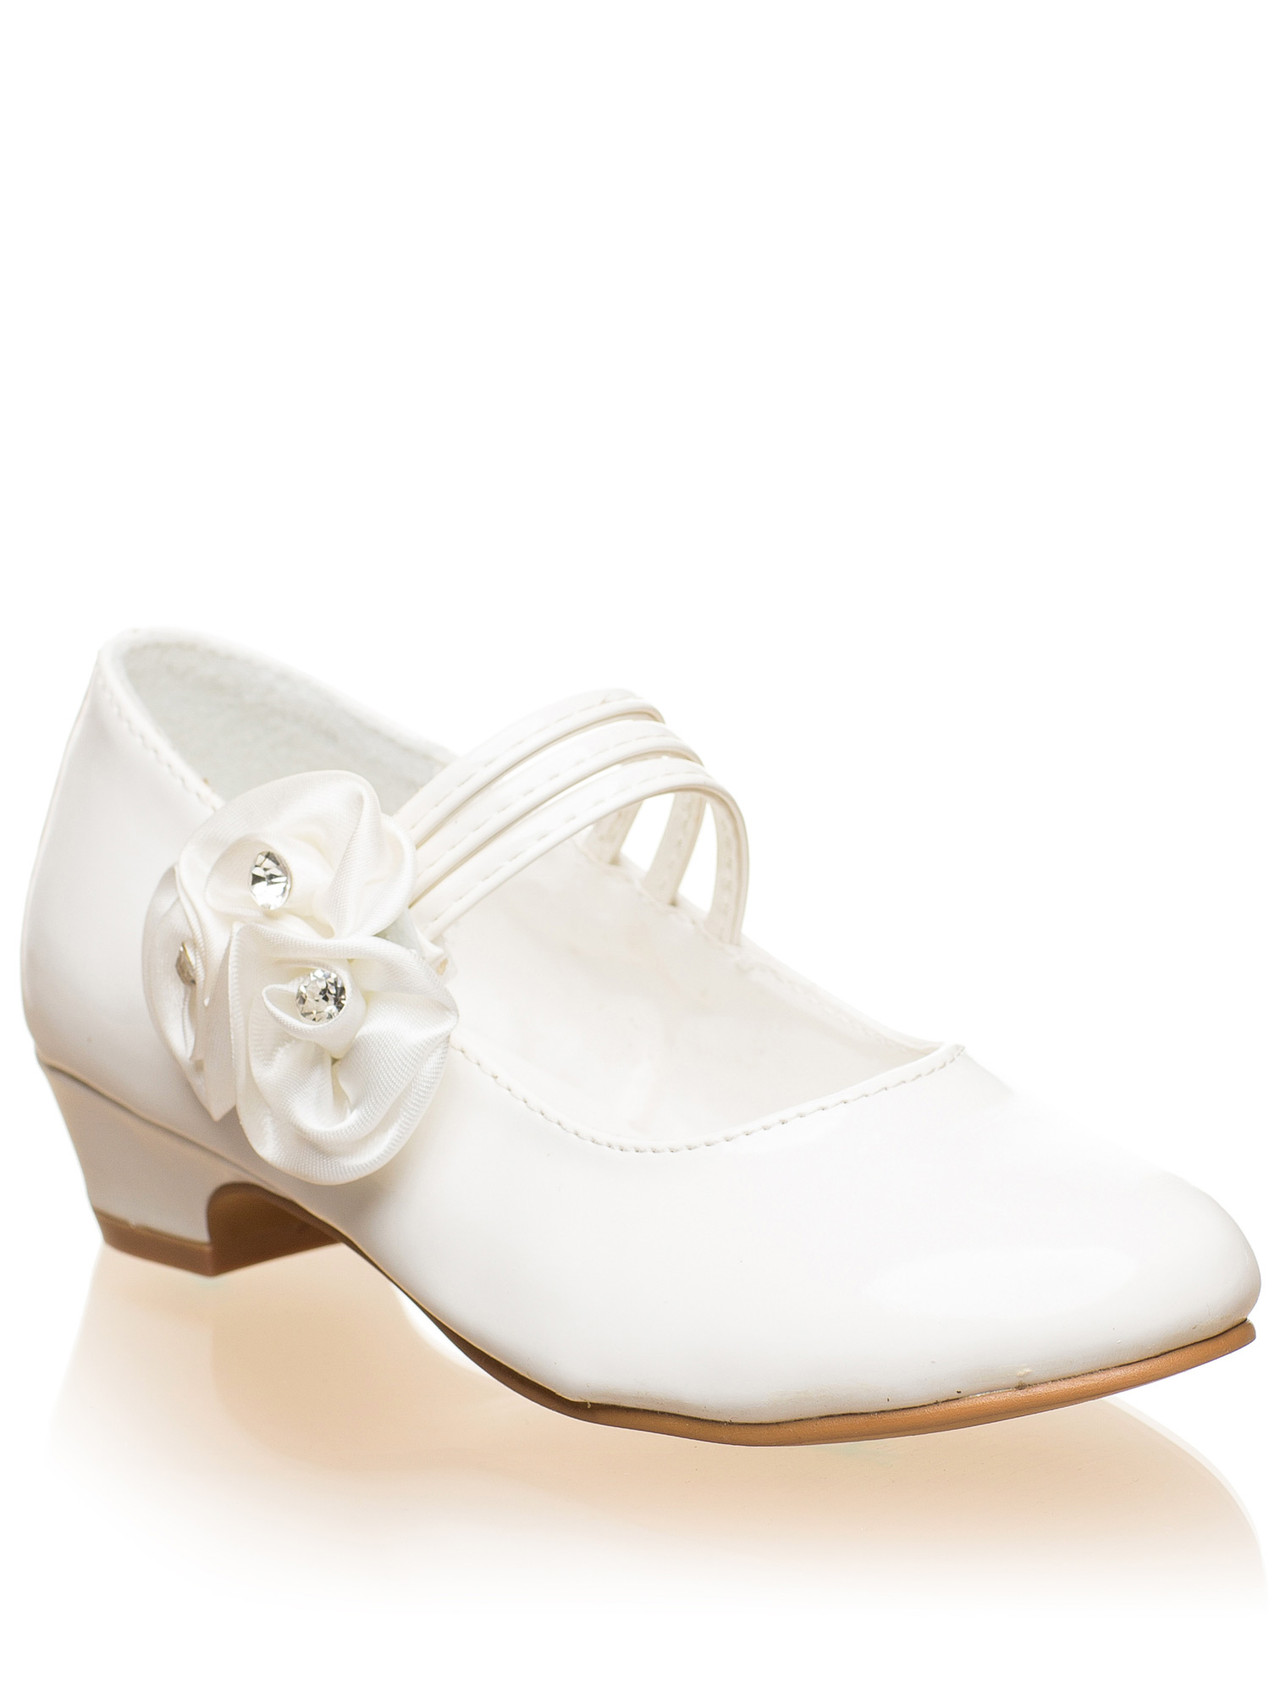 Girls white shoes | Flower girl shoes | Girls formal shoes